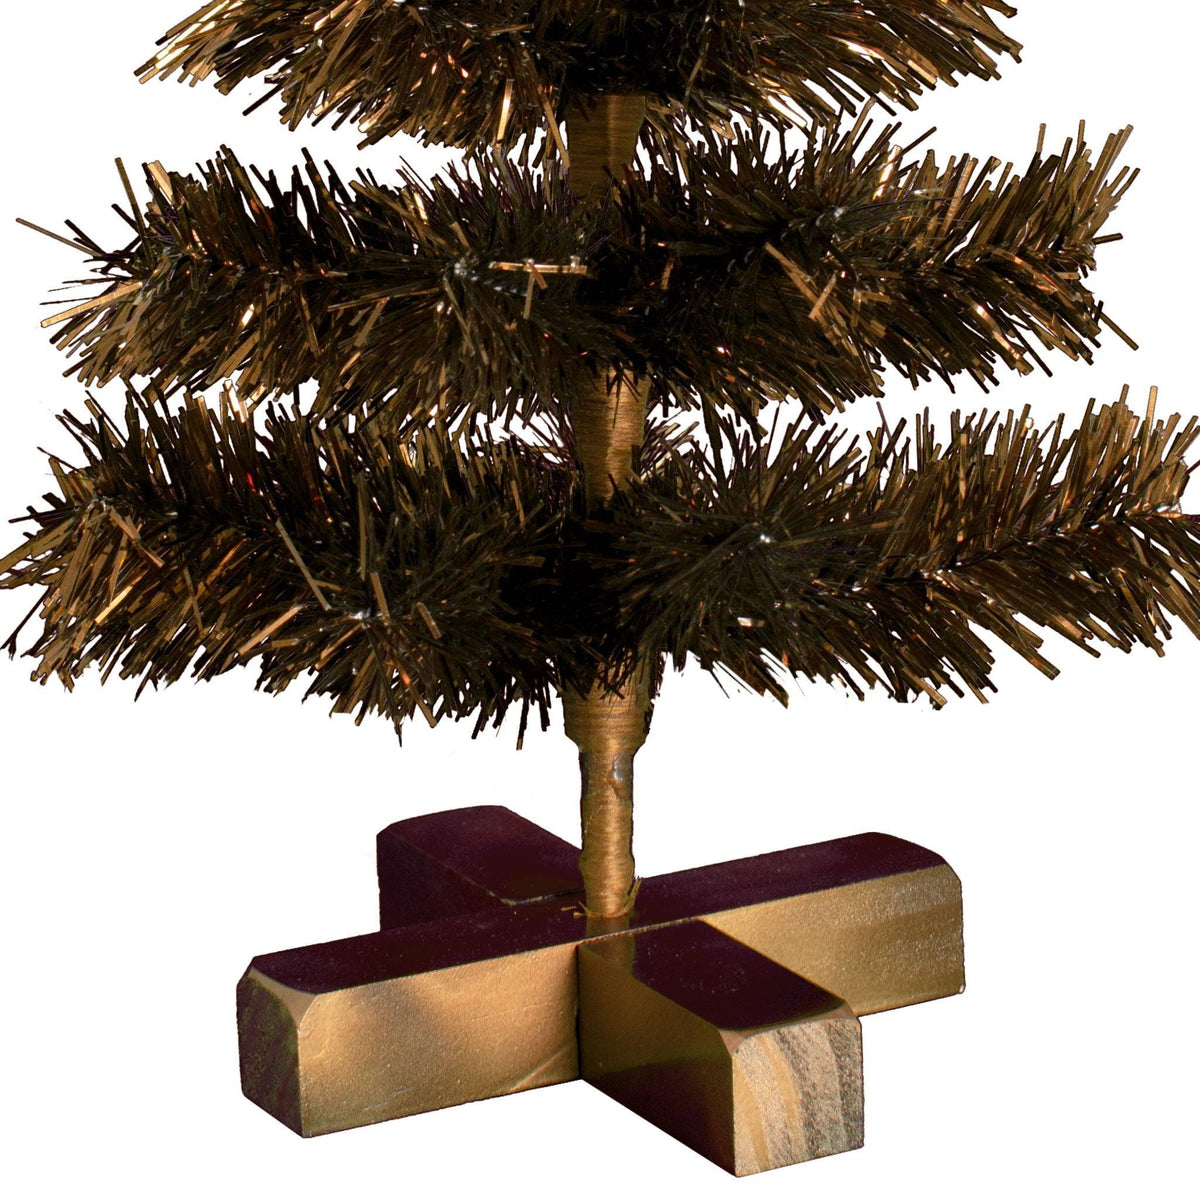 18in Tall Copper Trees come with a Wood Block Stand painted in shiny copper color. On sale now at leedisplay.com